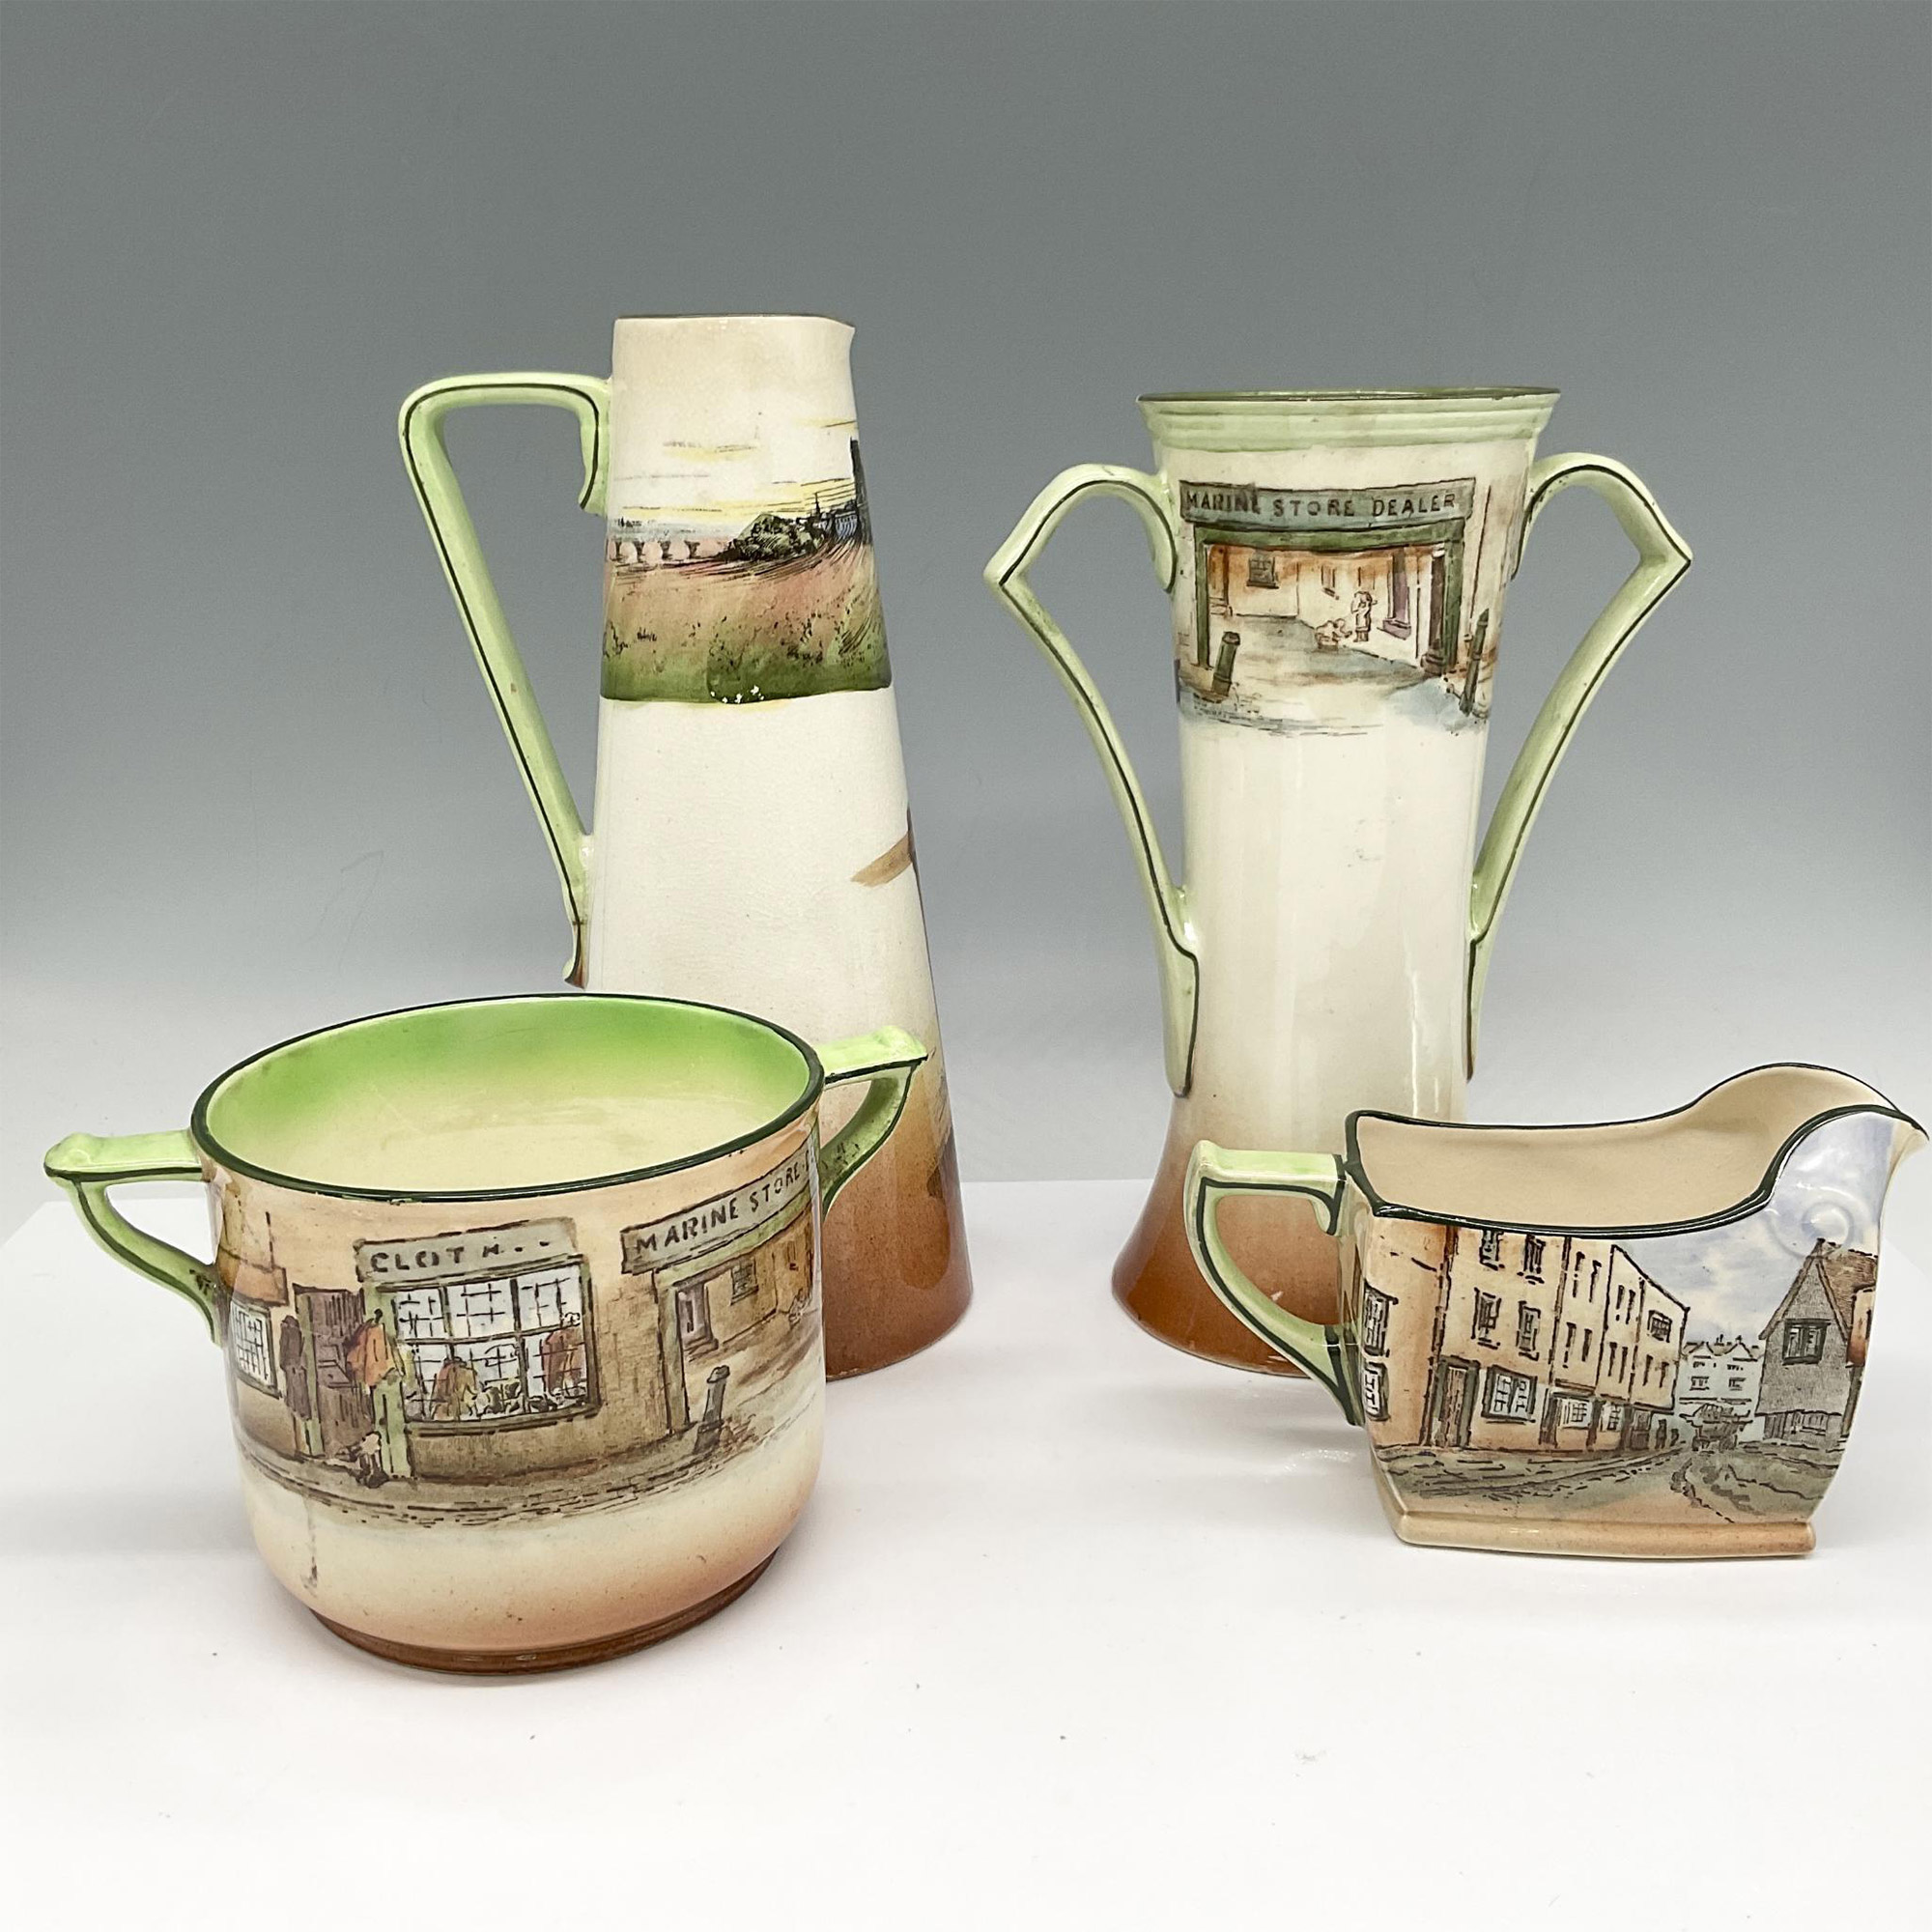 4pc Royal Doulton Dickens Ware Pitcher, Vase, Cup & Creamer - Image 2 of 3